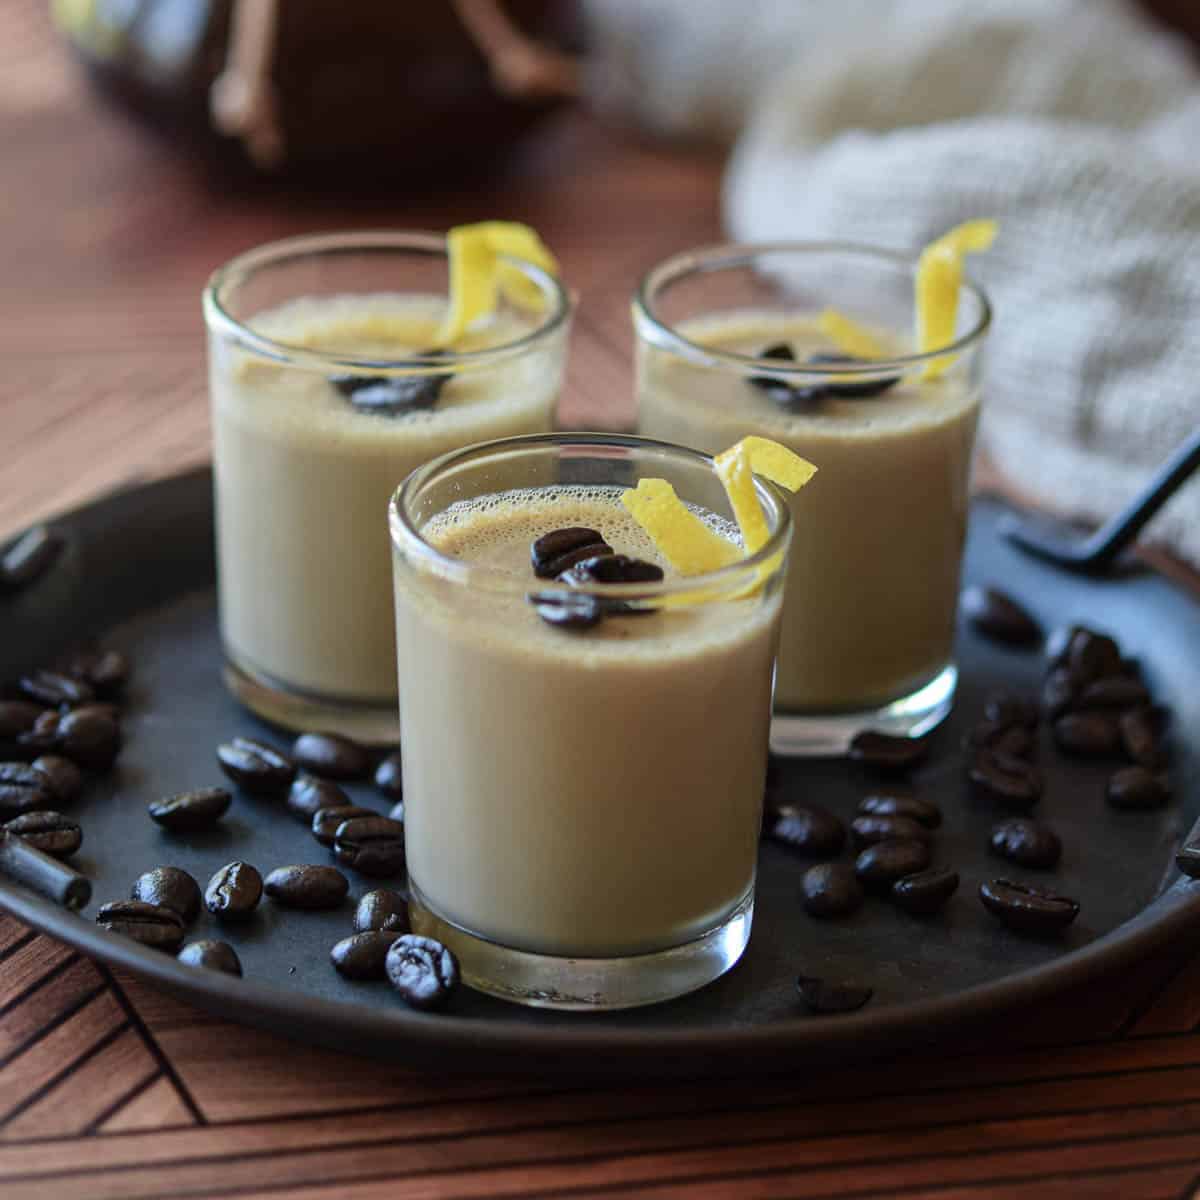 Espresso panna cotta in mini clear cups with coffee beans scattered around it on a wood surface.